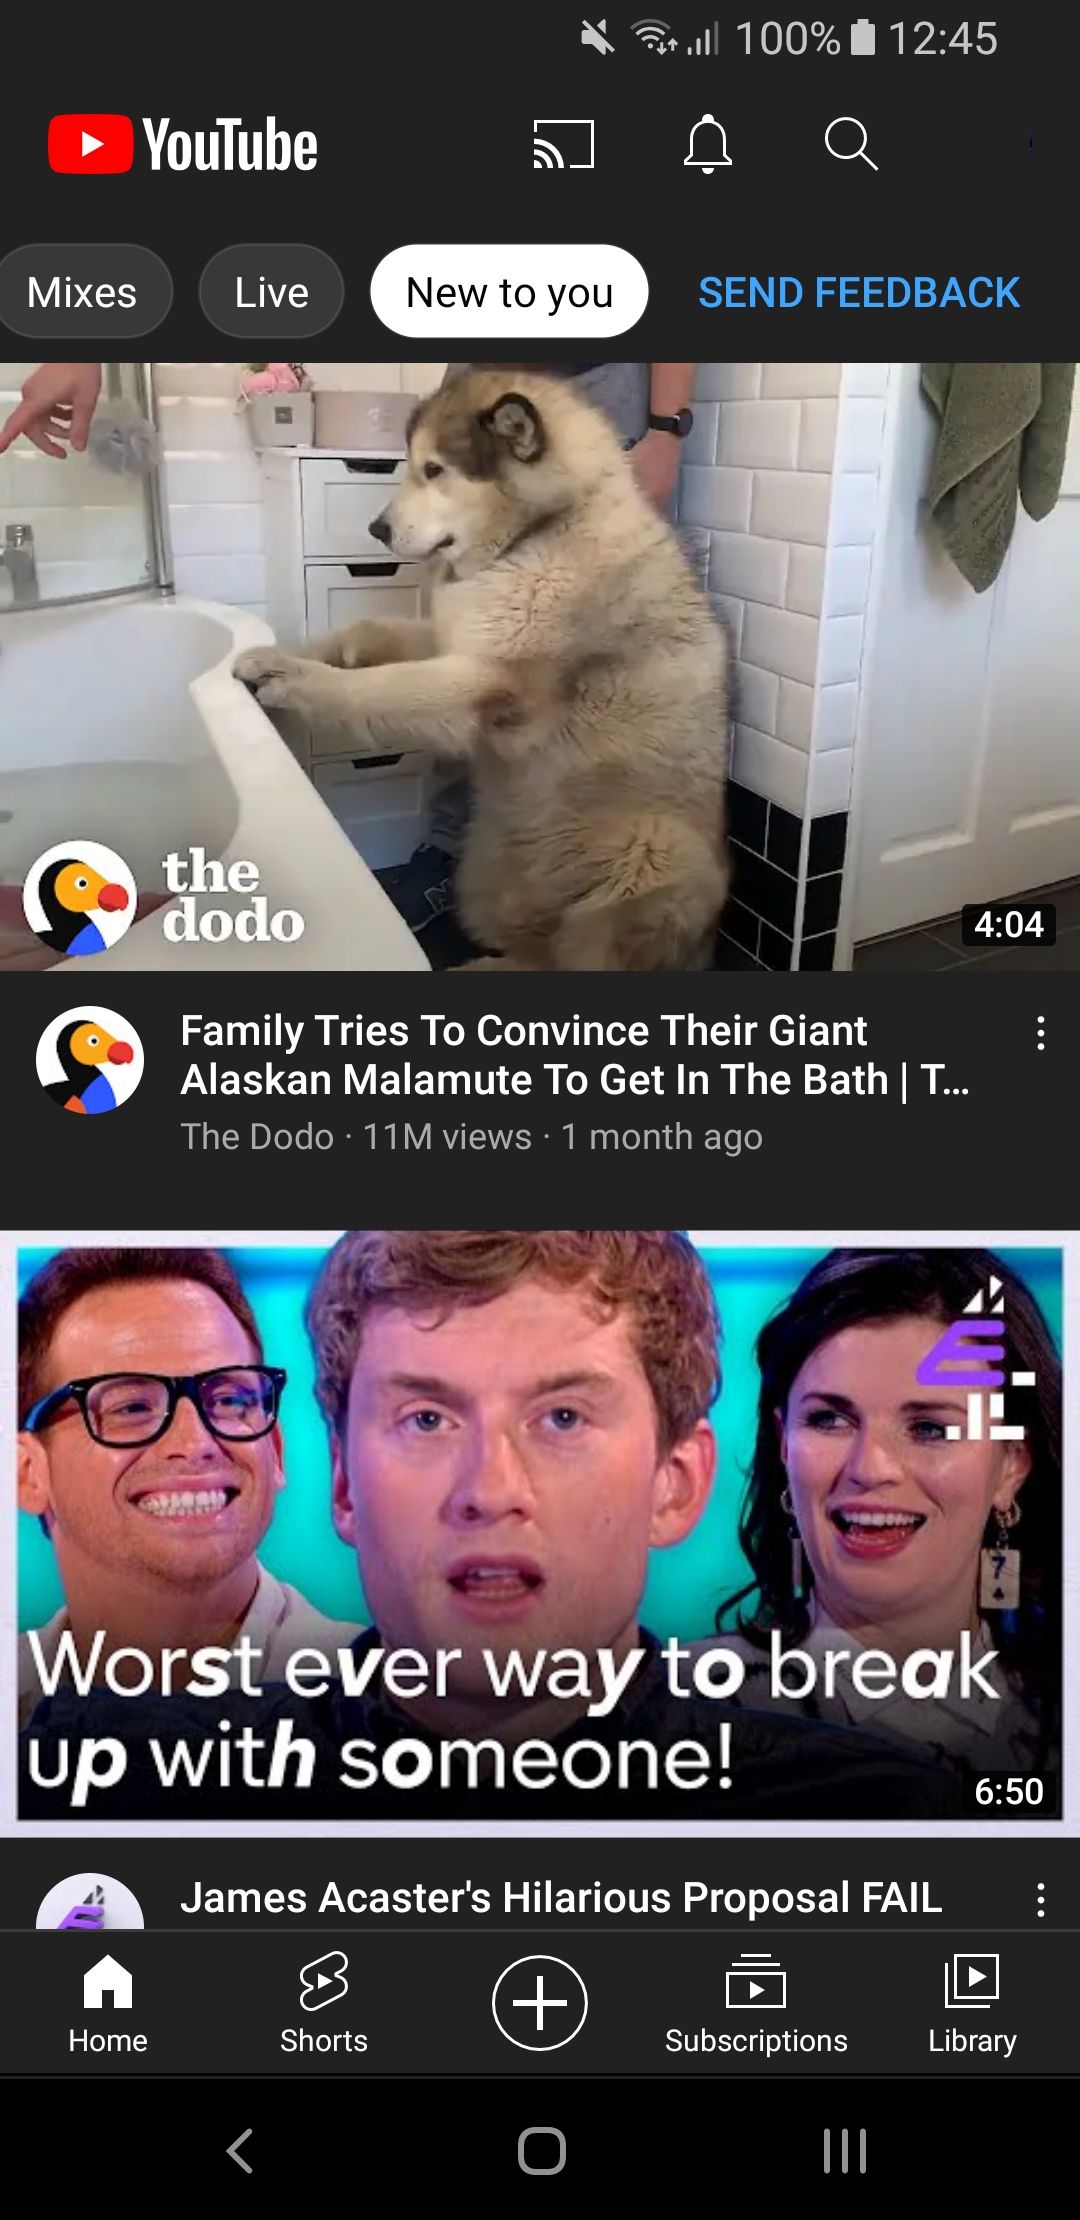 youtube mobile new to you